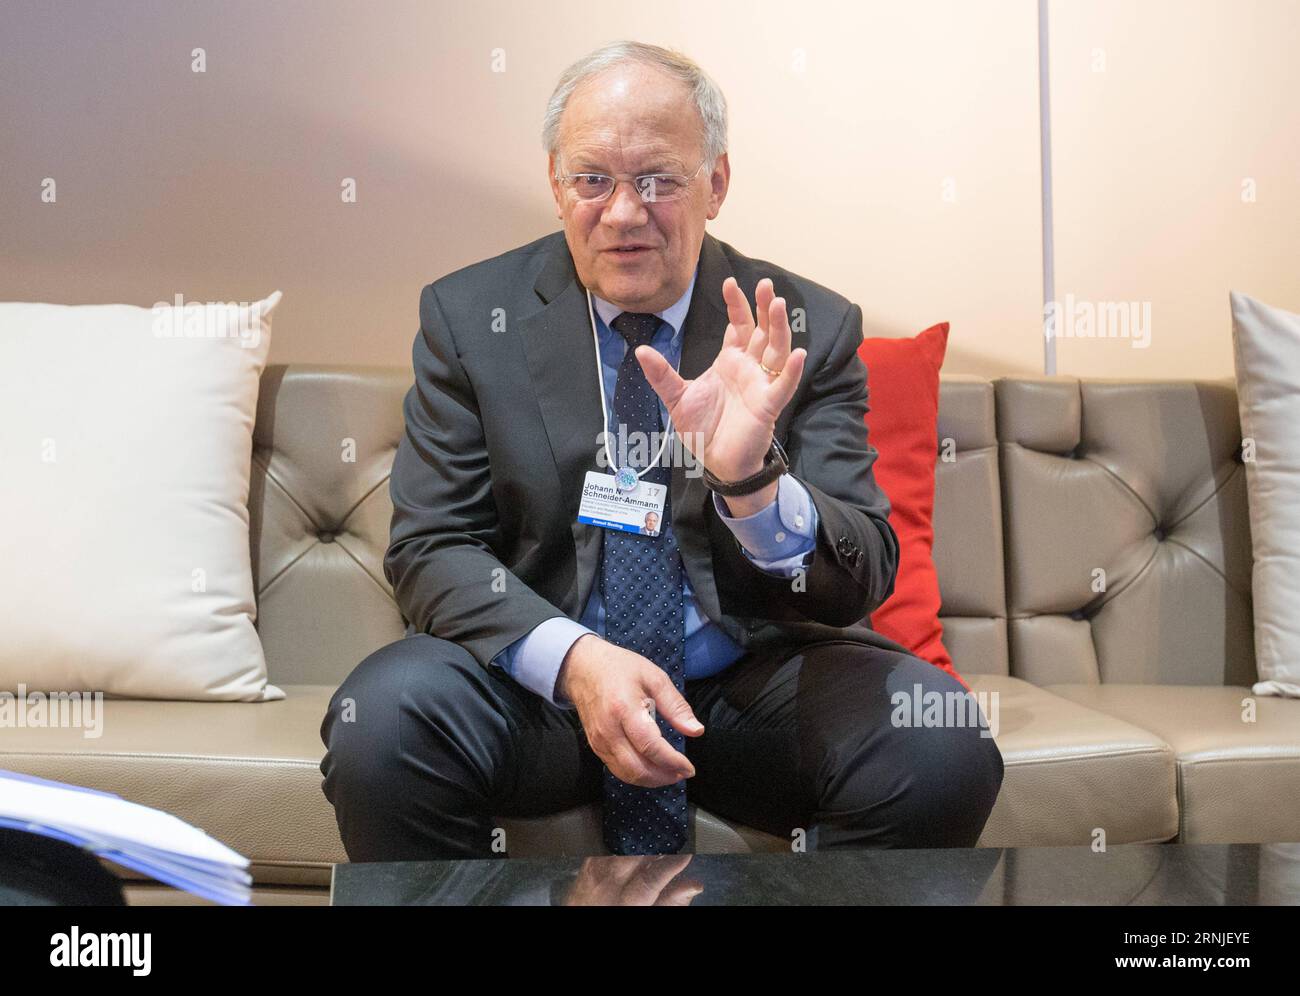 (170120) -- DAVOS, Jan. 20, 2017 () -- Swiss minister of Economic Affairs, Education and Research, Johann Schneider-Ammann, speaks during an interview with News Agency in Davos, Switzerland, Jan. 18, 2017. China and Switzerland have enjoyed a longstanding win-win partnership and China has an optimistic economic outlook, Johann Schneider-Ammann said here Wednesday. () (zw) SWITZERLAND-DAVOS-ECONOMY-INTERVIEW Xinhua PUBLICATIONxNOTxINxCHN   Davos Jan 20 2017 Swiss Ministers of Economic Affairs Education and Research Johann Schneider Ammann Speaks during to Interview With News Agency in Davos Swi Stock Photo